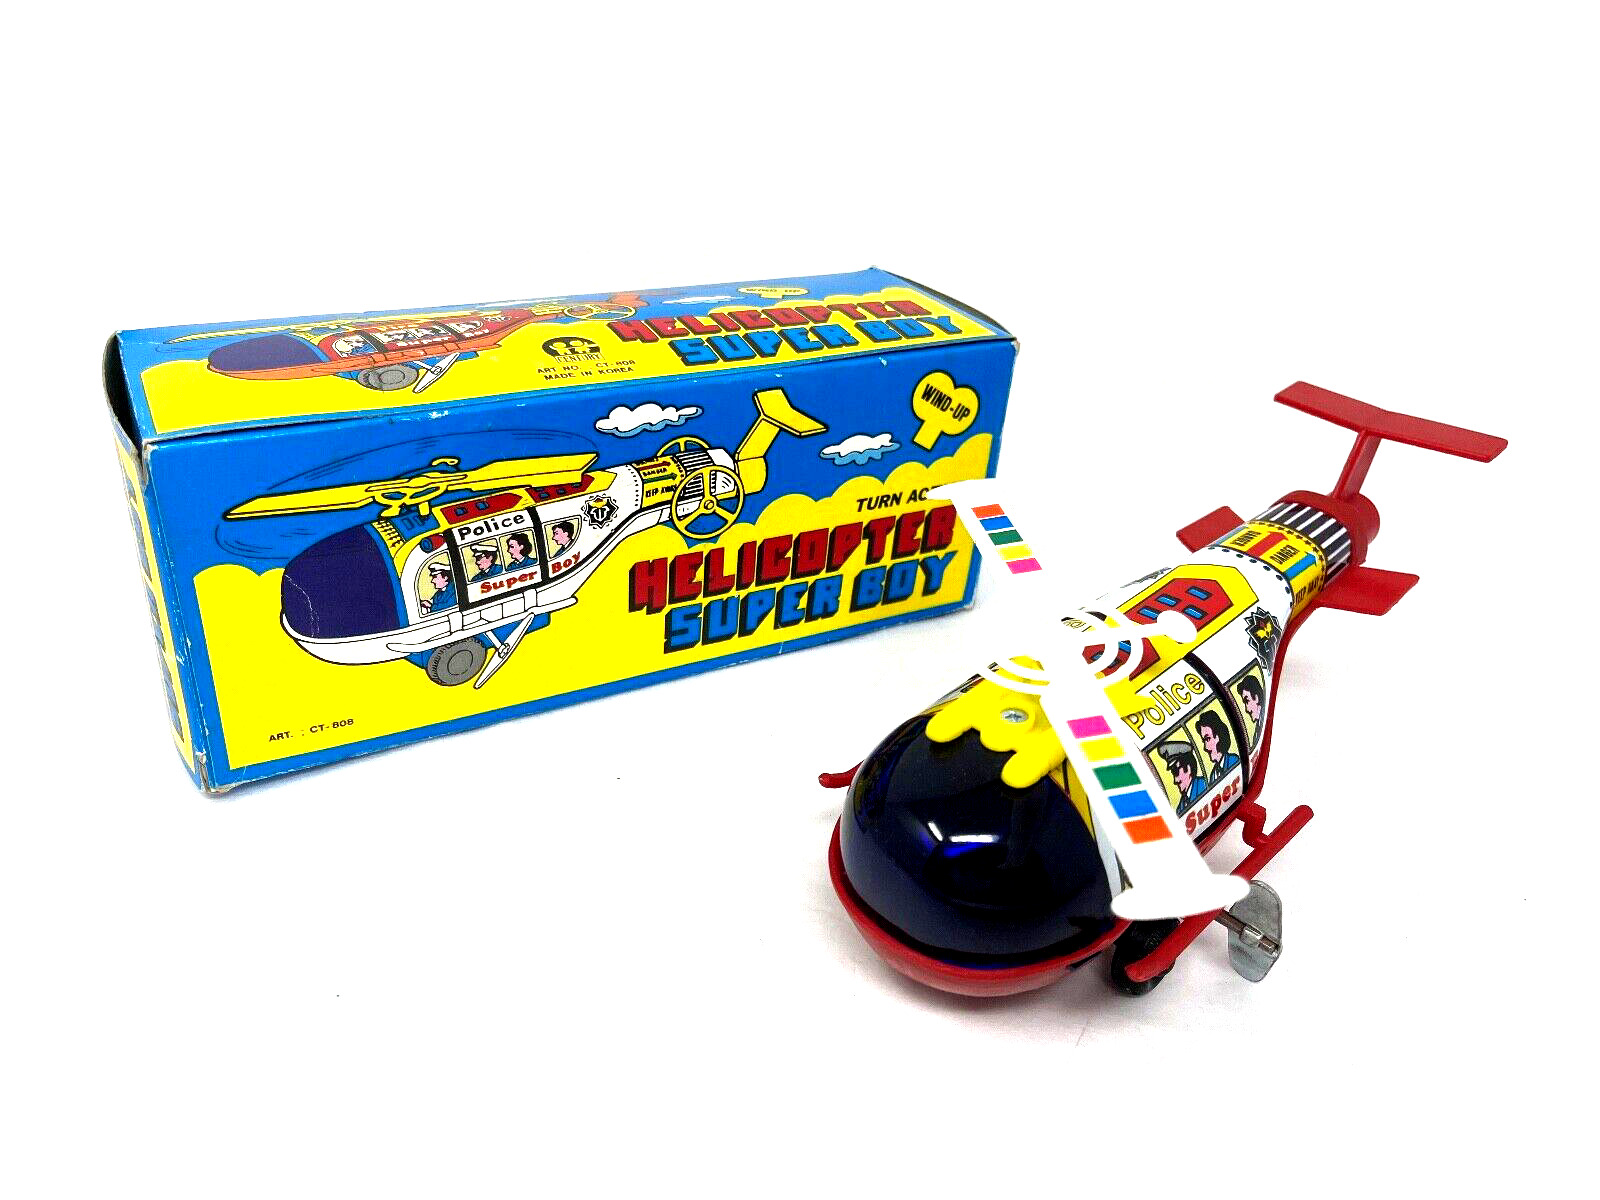 Toy Police Helicopter Super Boy Windup by Century